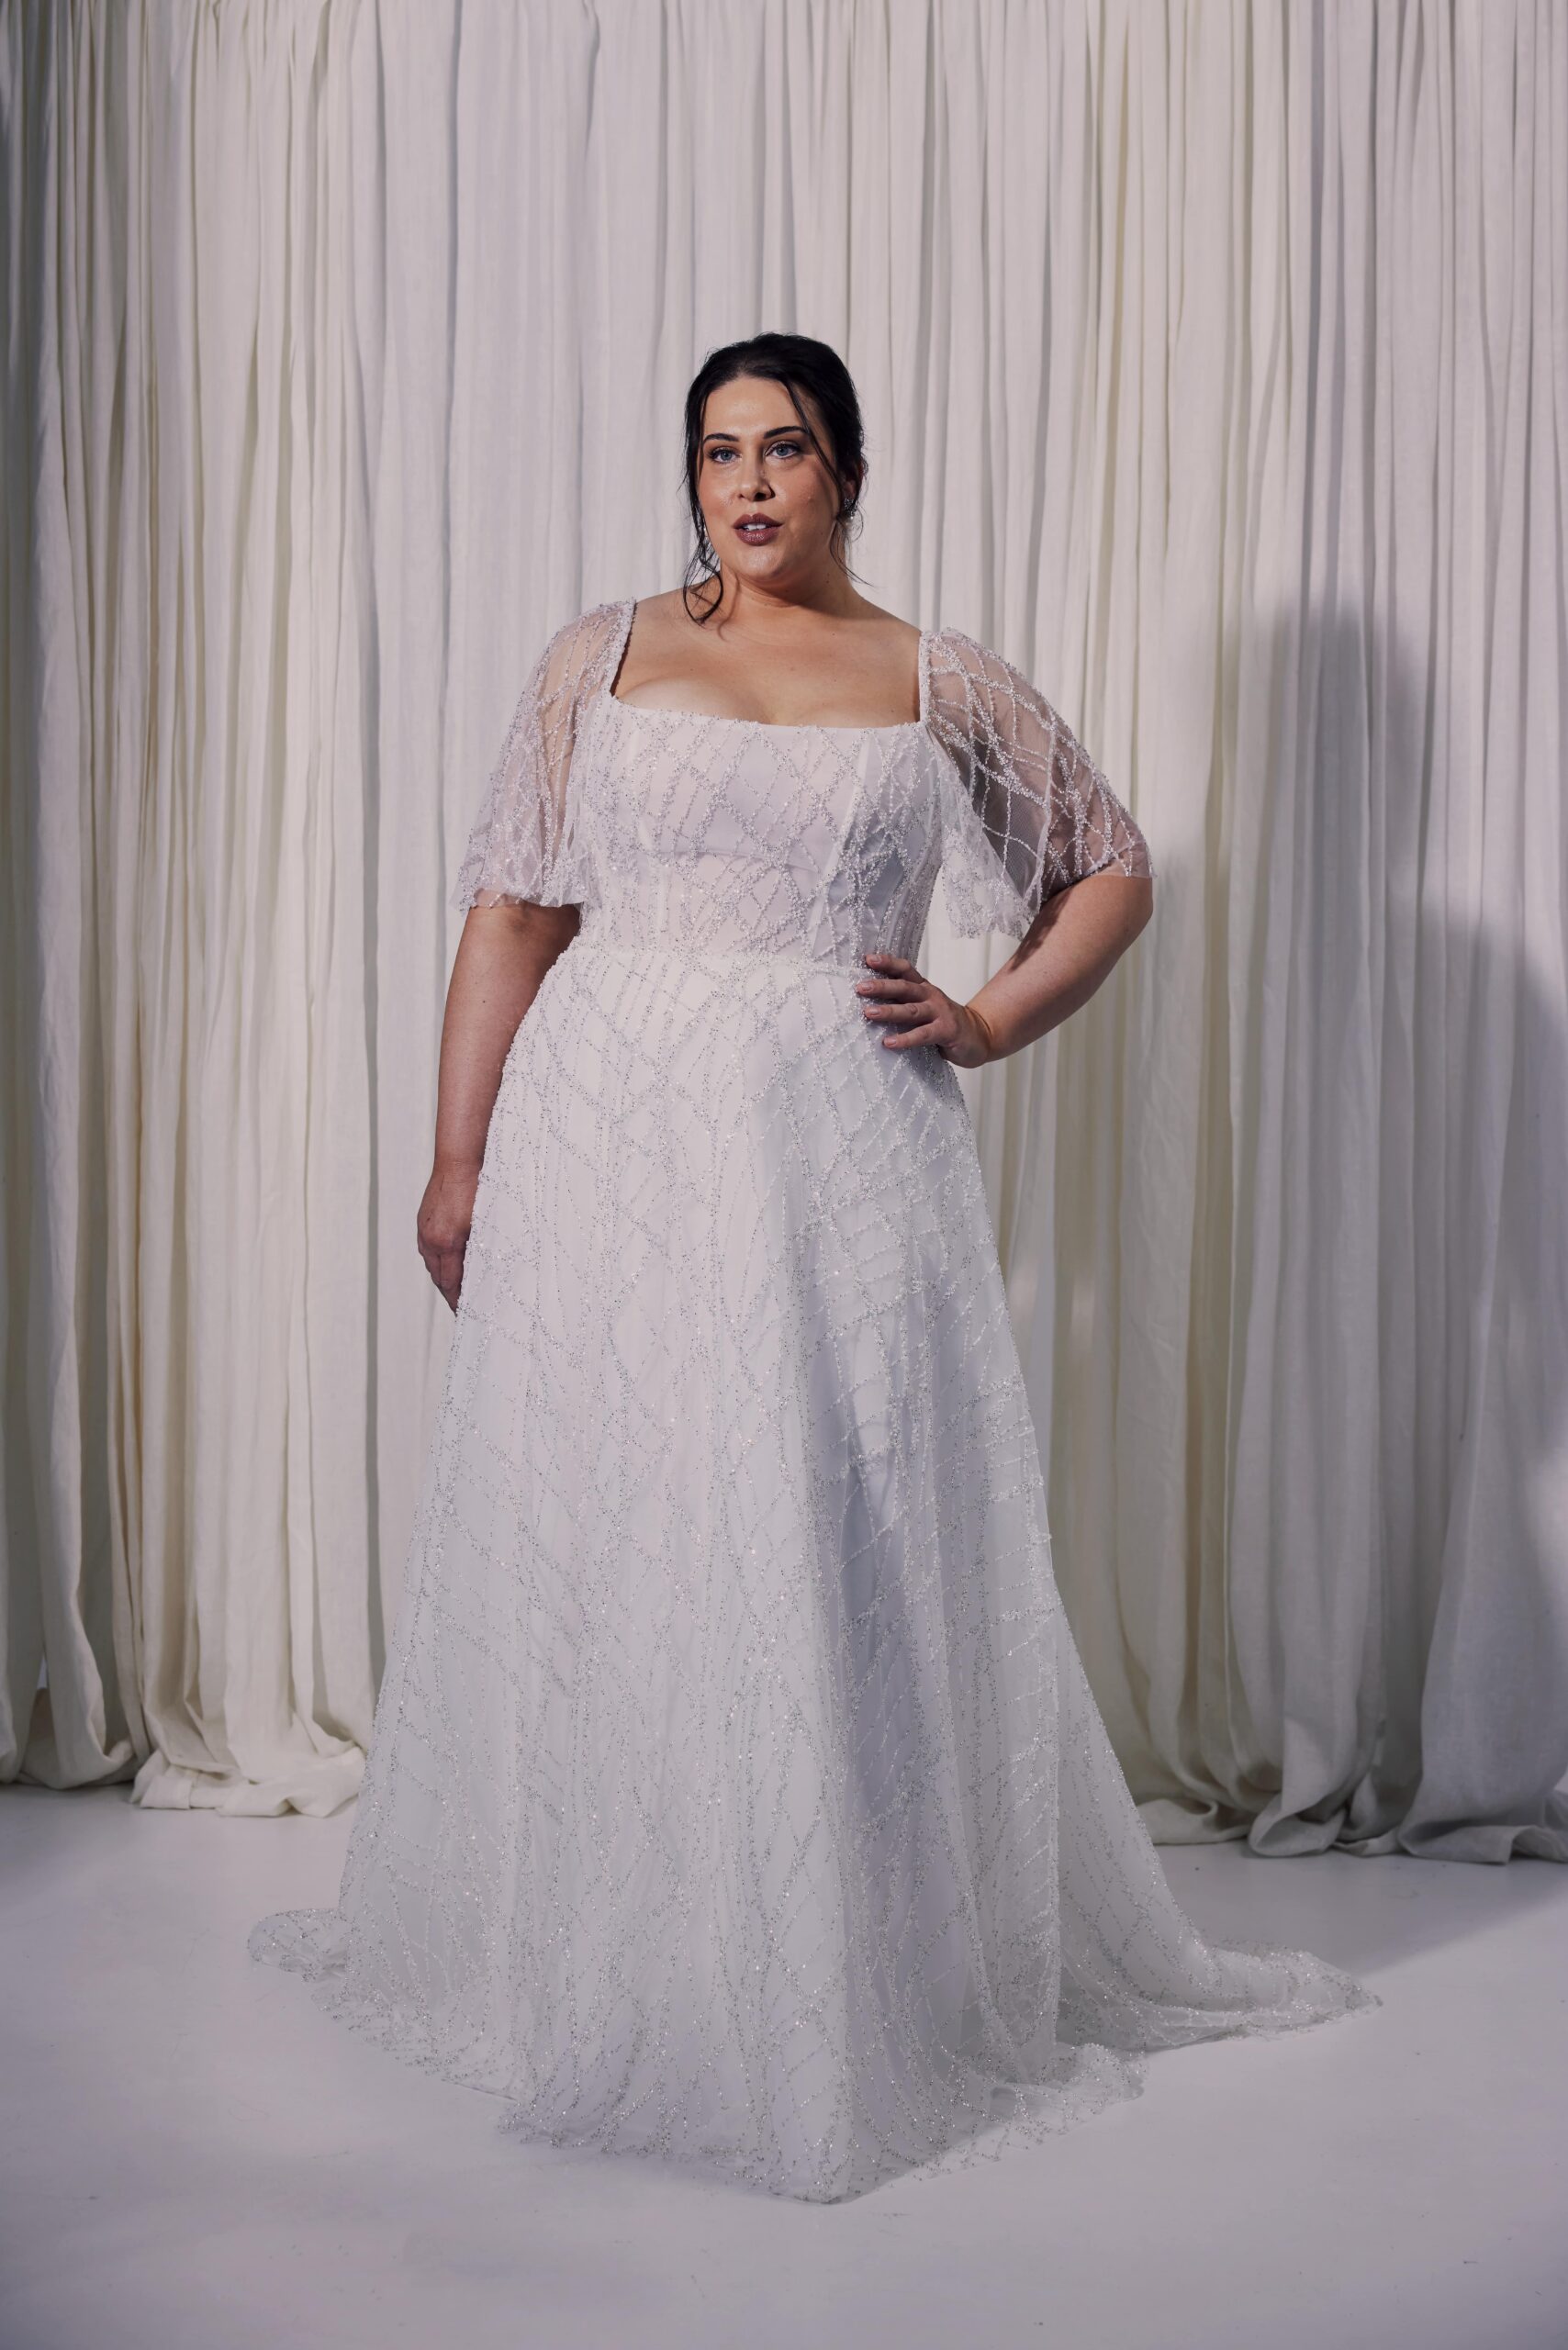 The Diamond gown - a beaded tulle A-line gown with a structured corset bodice, square neckline and flutter sleeves.